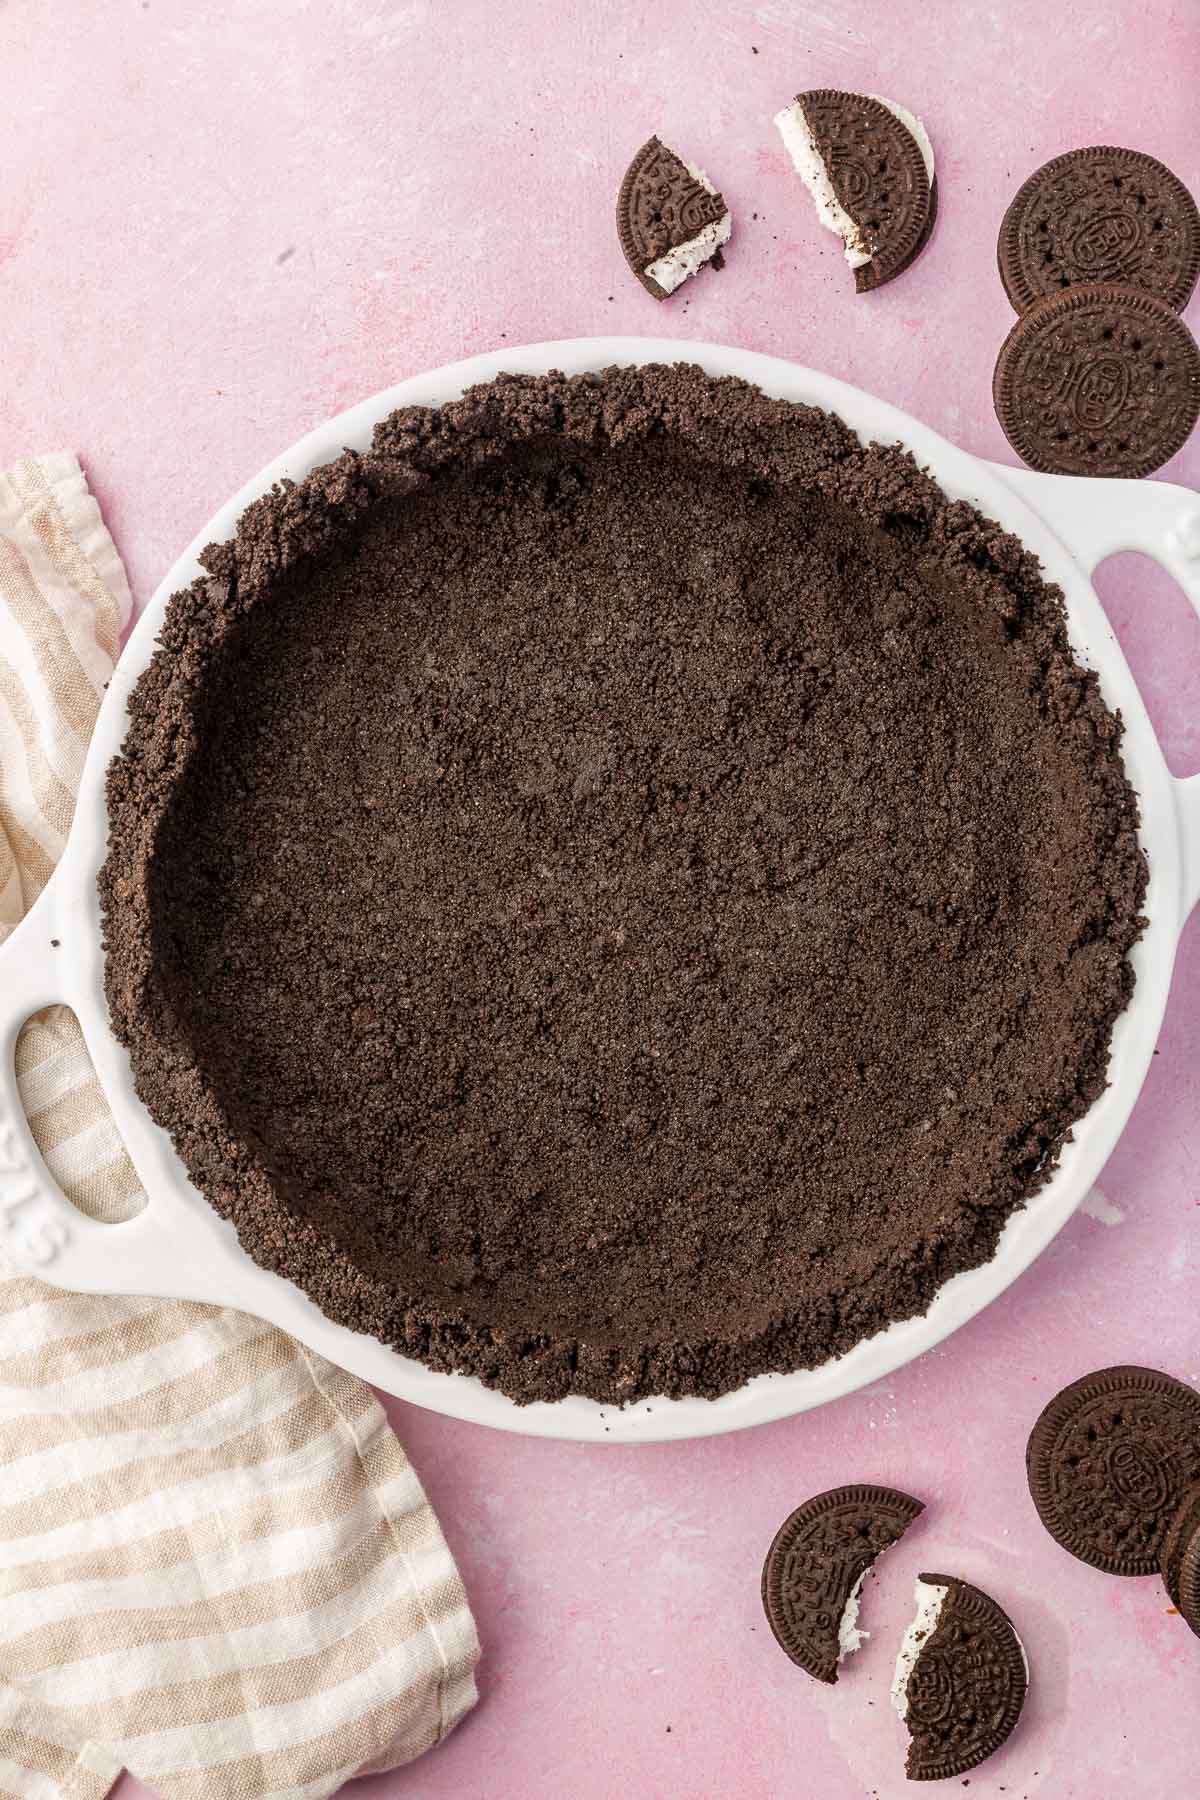 A gluten-free Oreo pie crust pressed into a white tart pan with whole and broken Oreos surrounding it on a pink table.